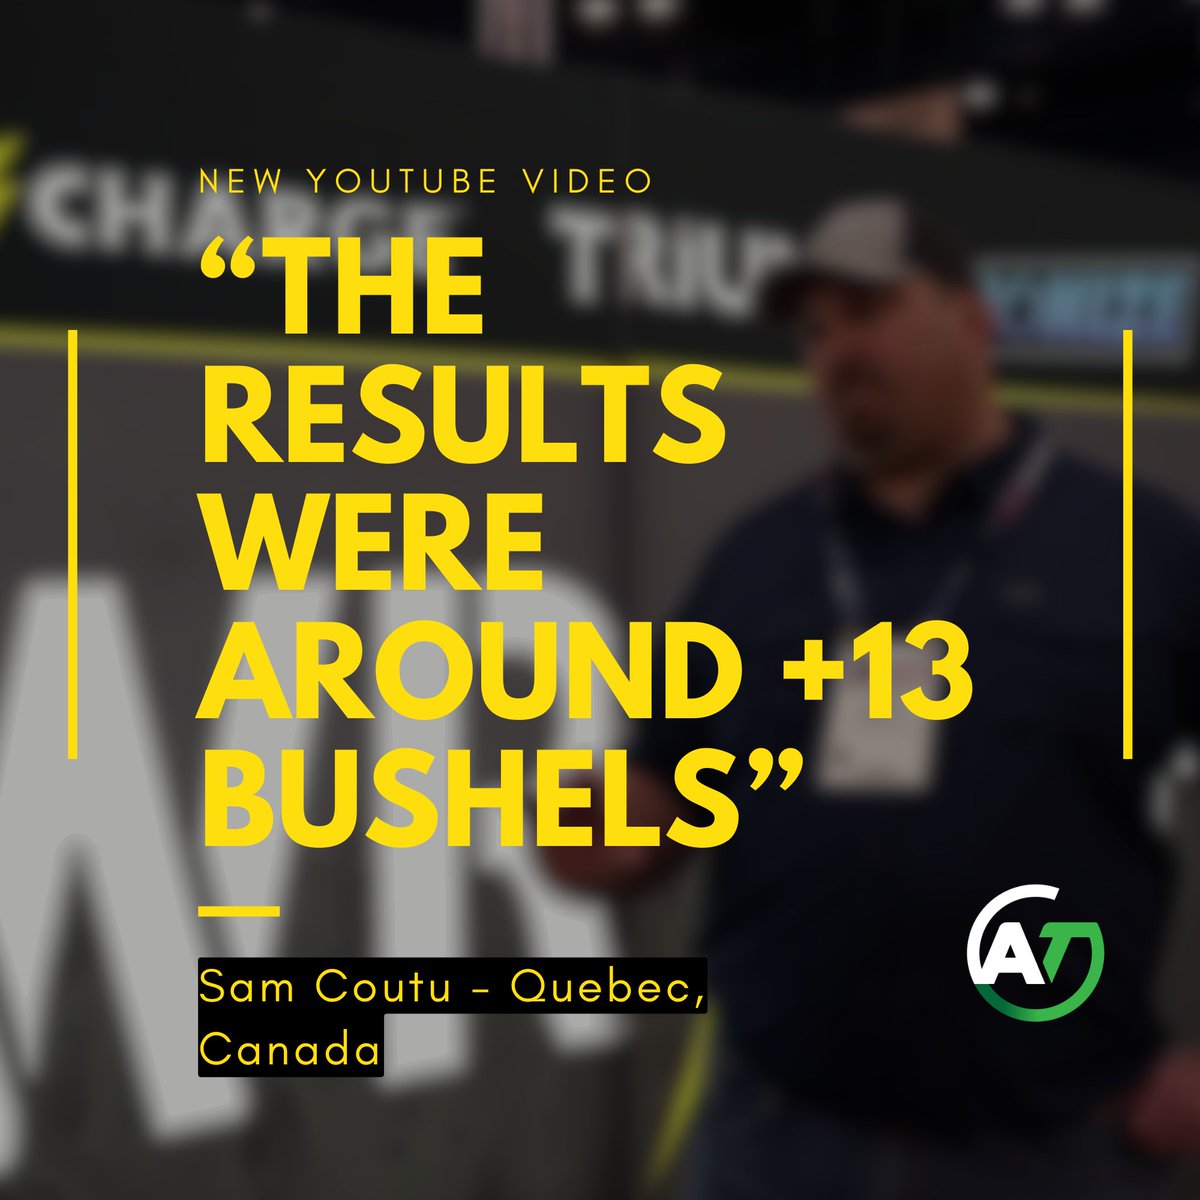 NEW VIDEO ALERT!

By using NutriCharge, he saw around 13 bushels more than his normal yield. There is a lot more said in his full interview, therefore we encourage you to go to our YouTube channel right now!

#agrotechusa #nutricharge #cropyields #sustainablefertilizers